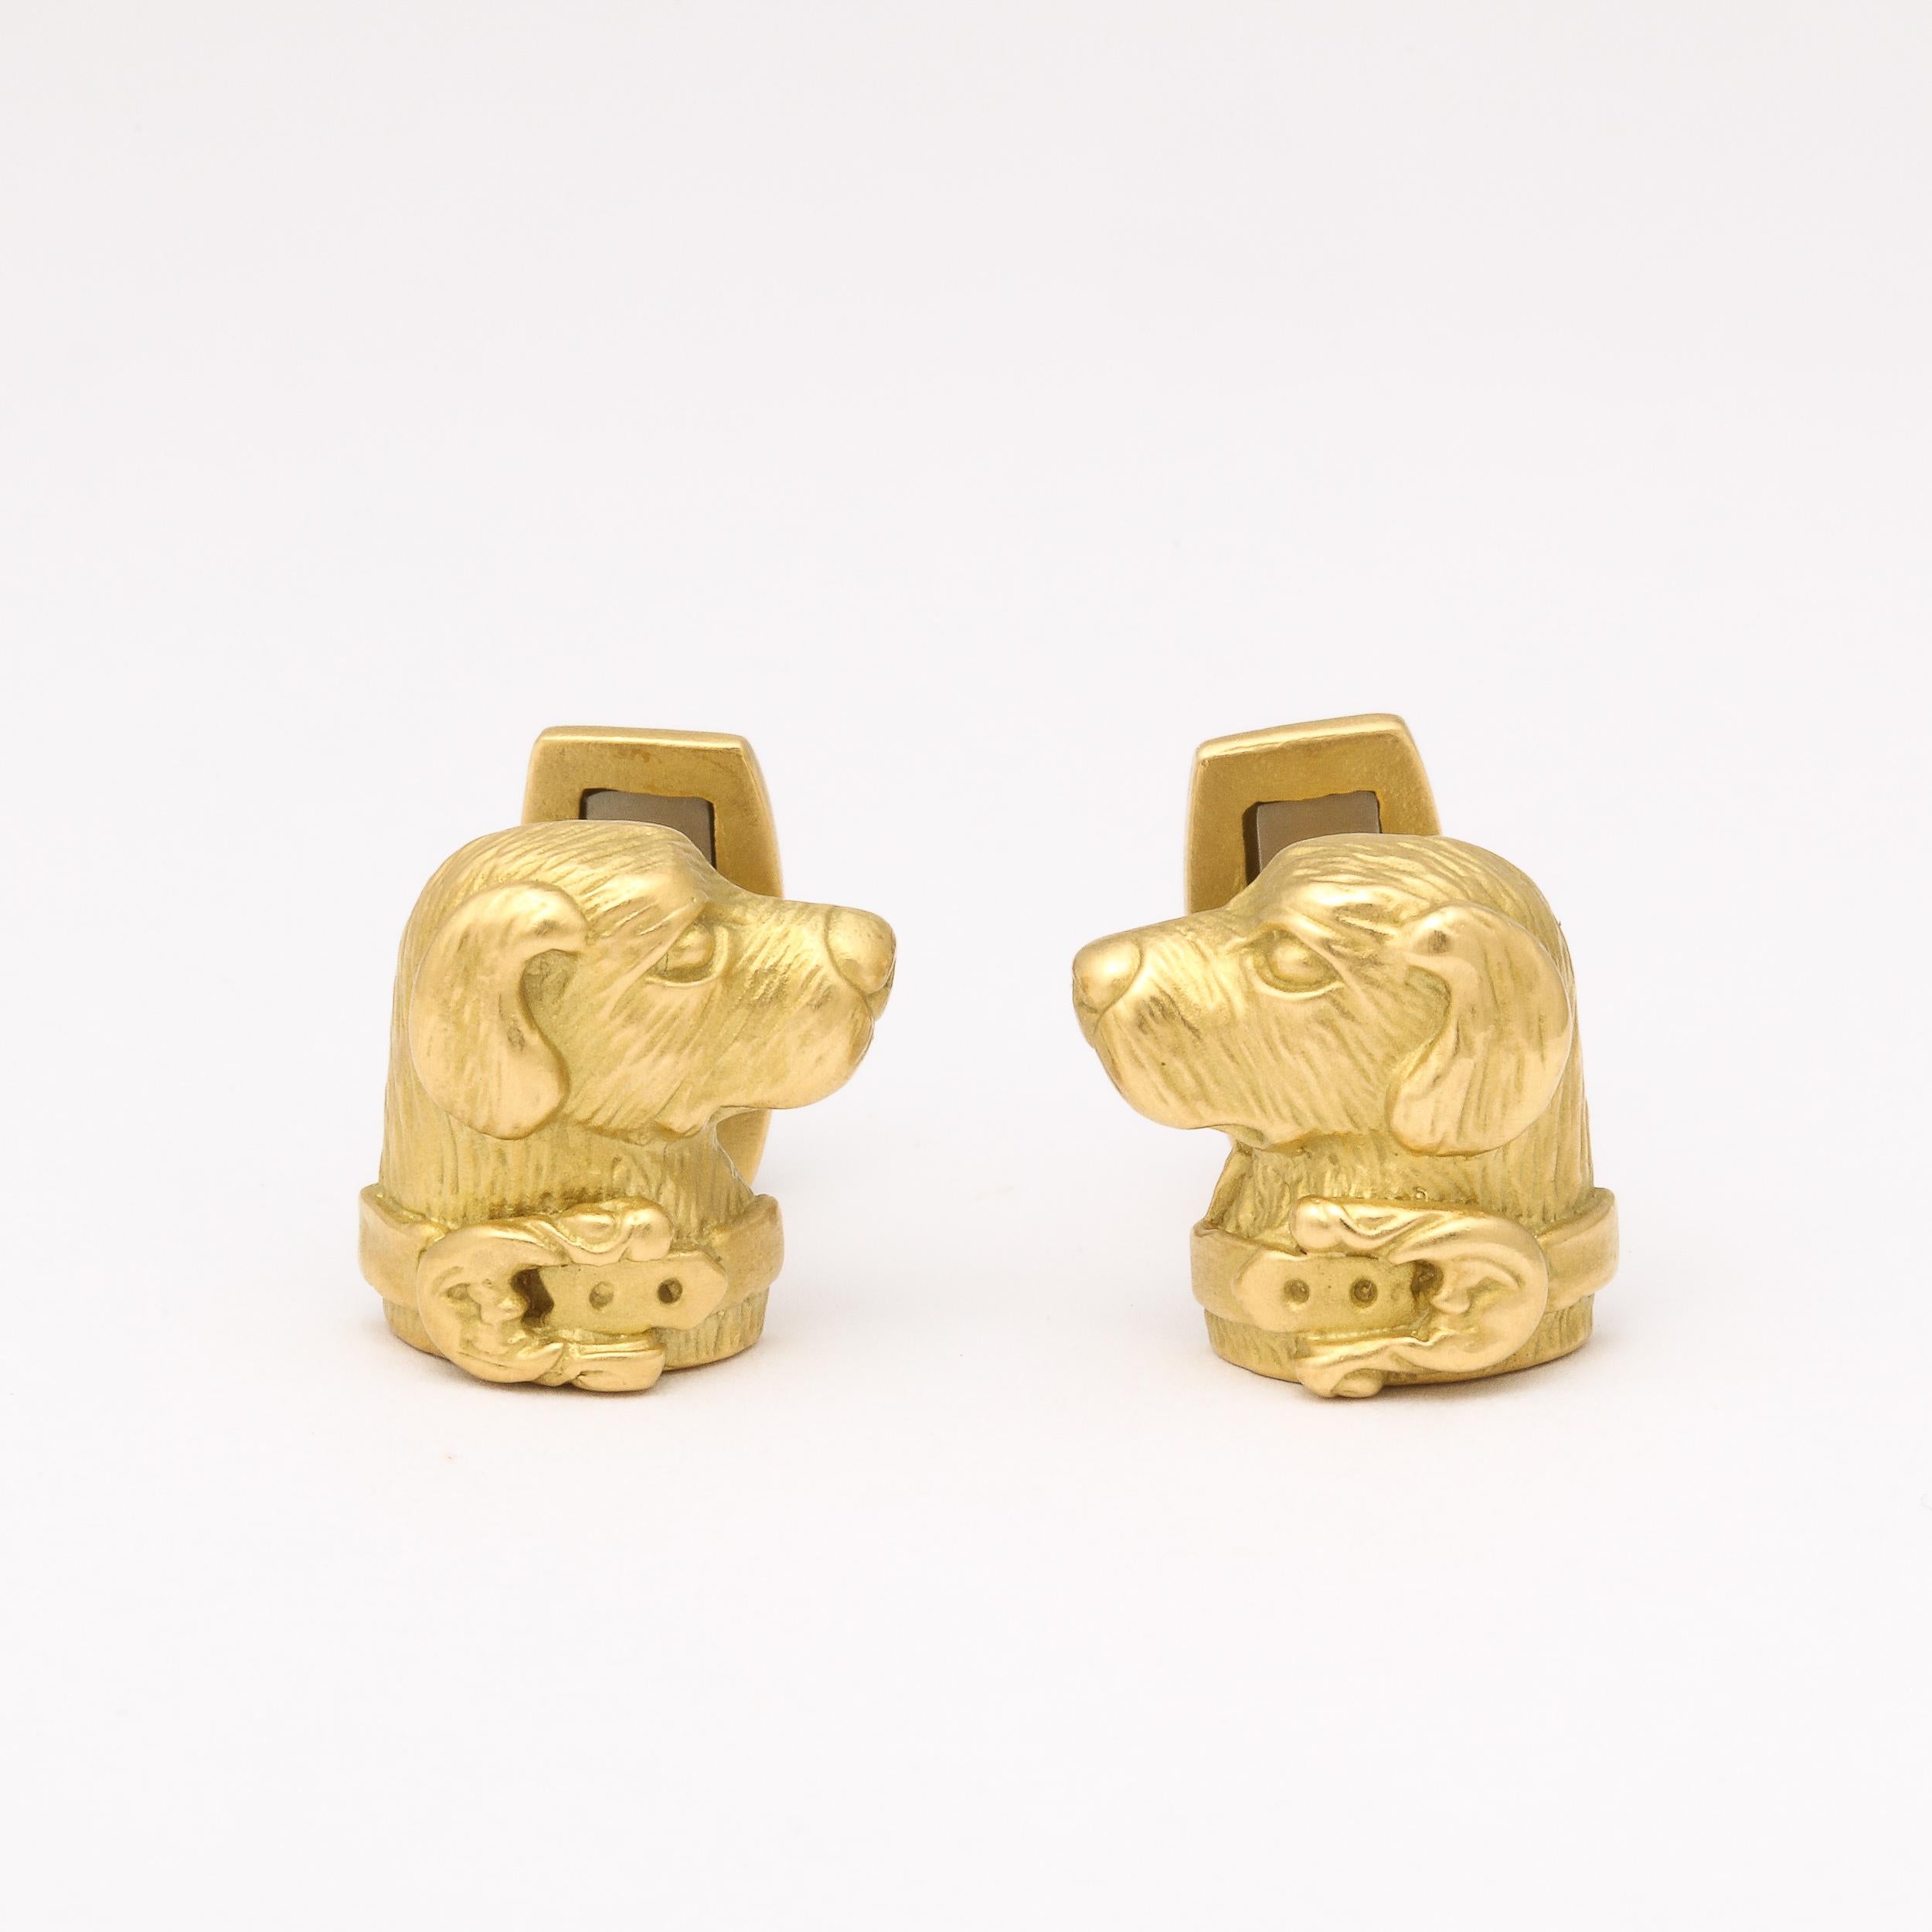 These charming and playful cufflinks formed in 14 Carat Yellow Gold originate from the United States from circa 1980 in the Manner of Barry Kieselstein-Cord 1. Total weight of 16 grams, 8 grams per link. They feature beautiful detail and texturing,